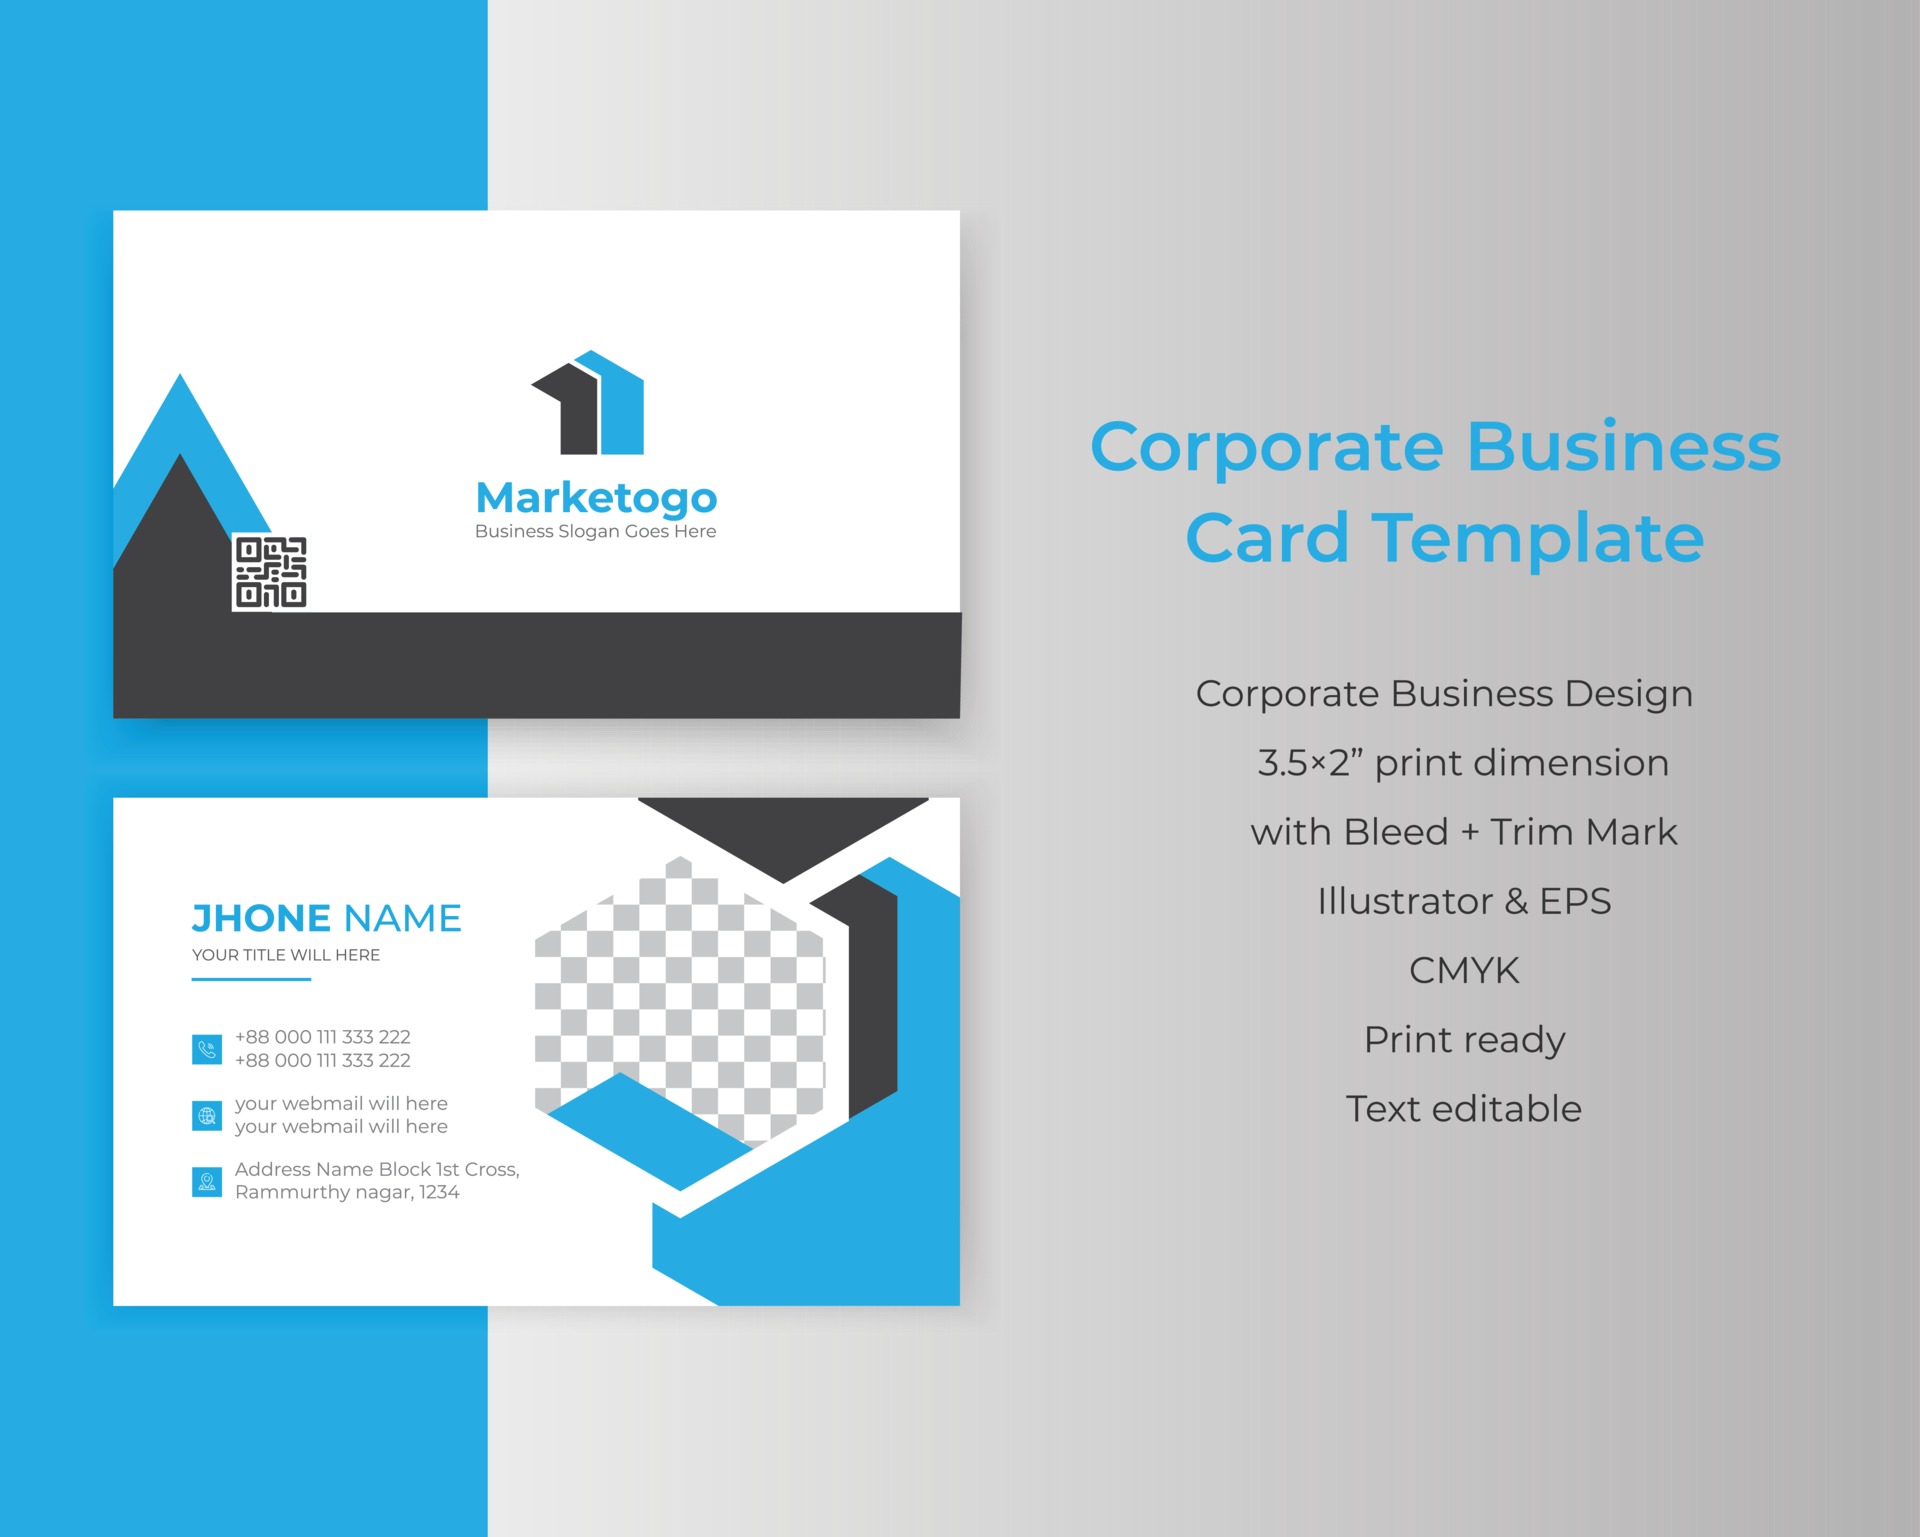 Premium Vector  Print-ready black business card design with